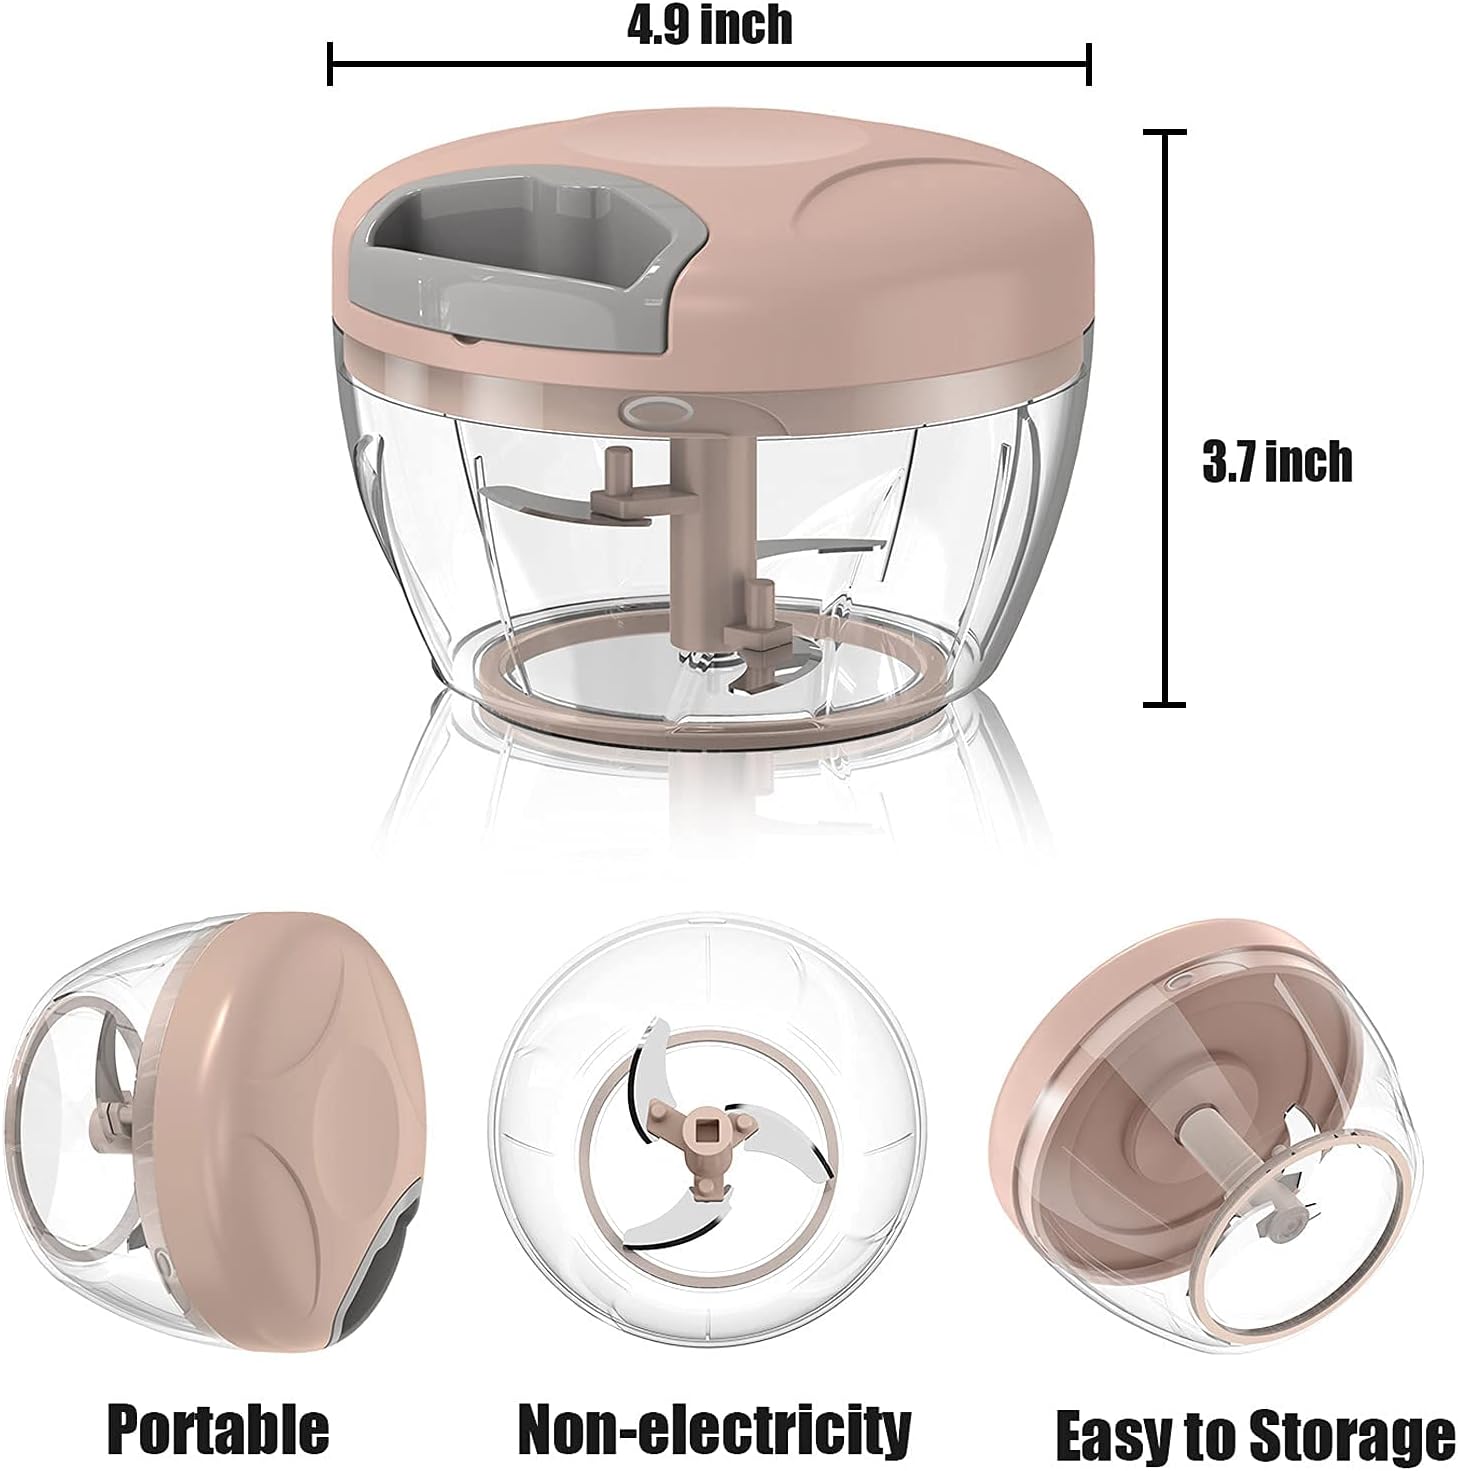 (Pink) - Food Chopper,Yeaky Powerful Hand Held Vegetable Chopper with Stainless Steel Blades, Manual Food Chopper Processor Onion Chopper for Nuts,Salad,Puree and Pesto (Pink)